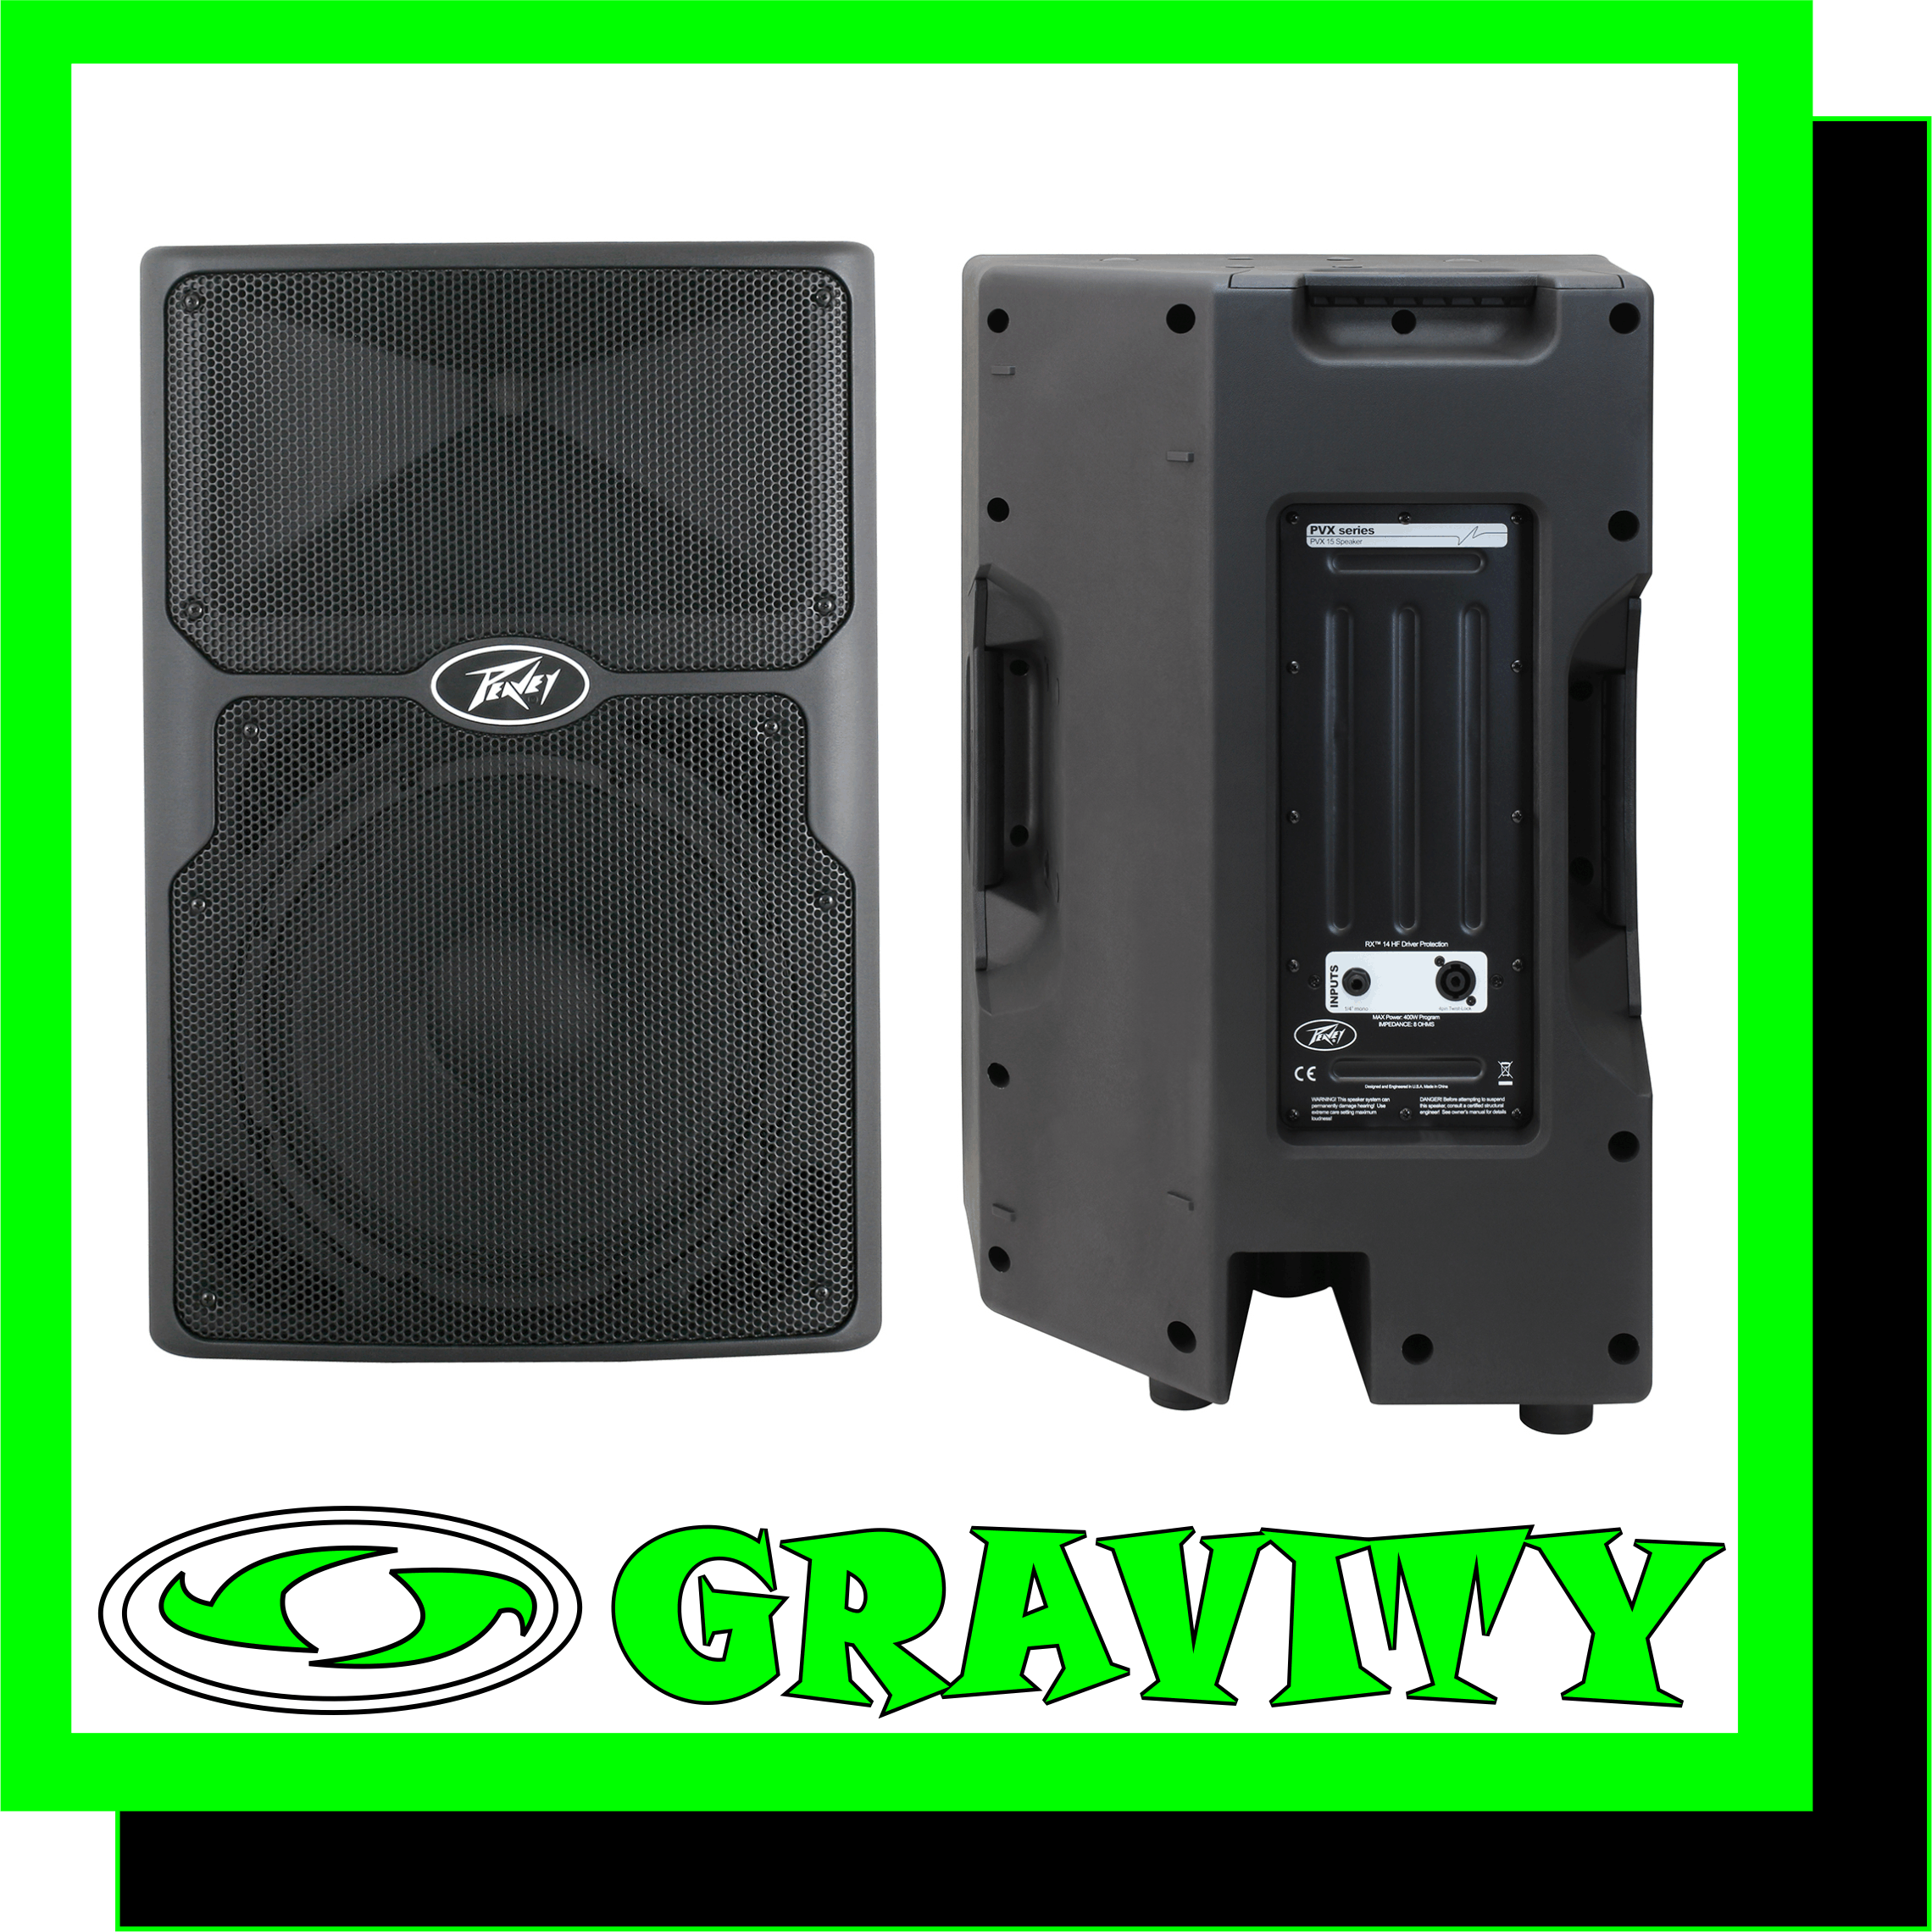 The PVX 15 passive loudspeakers deliver superior sound quality by utilizing advanced materials like its lightweight, roadworthy molded polypropylene exterior. Lightweight, durable and voiced for live music or speech applications, these two-way speaker systems will handle 400 watts program and 800 watts peak power and feature heavy-duty woofers, 2-3/8" voice coils and the Peavey RX14™ 1.4-" titanium diaphragm compression driver coupled to a constant directivity horn.   Features -400 watts program -800 watts peak -Top, bottom and right side flying point inserts -Full-coverage heavy-duty perforated steel grille, with powder-coat finish -Rugged Construction -Patented, asymmetrical Quadratic Throat -Waveguide™ Technology - 100º by 50º coverage. 15º upward and 35º downward directing sound to your audience -RX14™ - Titanium Compression Driver -Weight Unpacked: 47.00 lb(21.319 kg) -Weight Packed: 53.79 lb(24.4 kg) -Width Packed: 21.625"(54.9275 cm) -Height Packed: 31.625"(80.3275 cm) -Depth Packed: 20.375"(51.7525 cm)